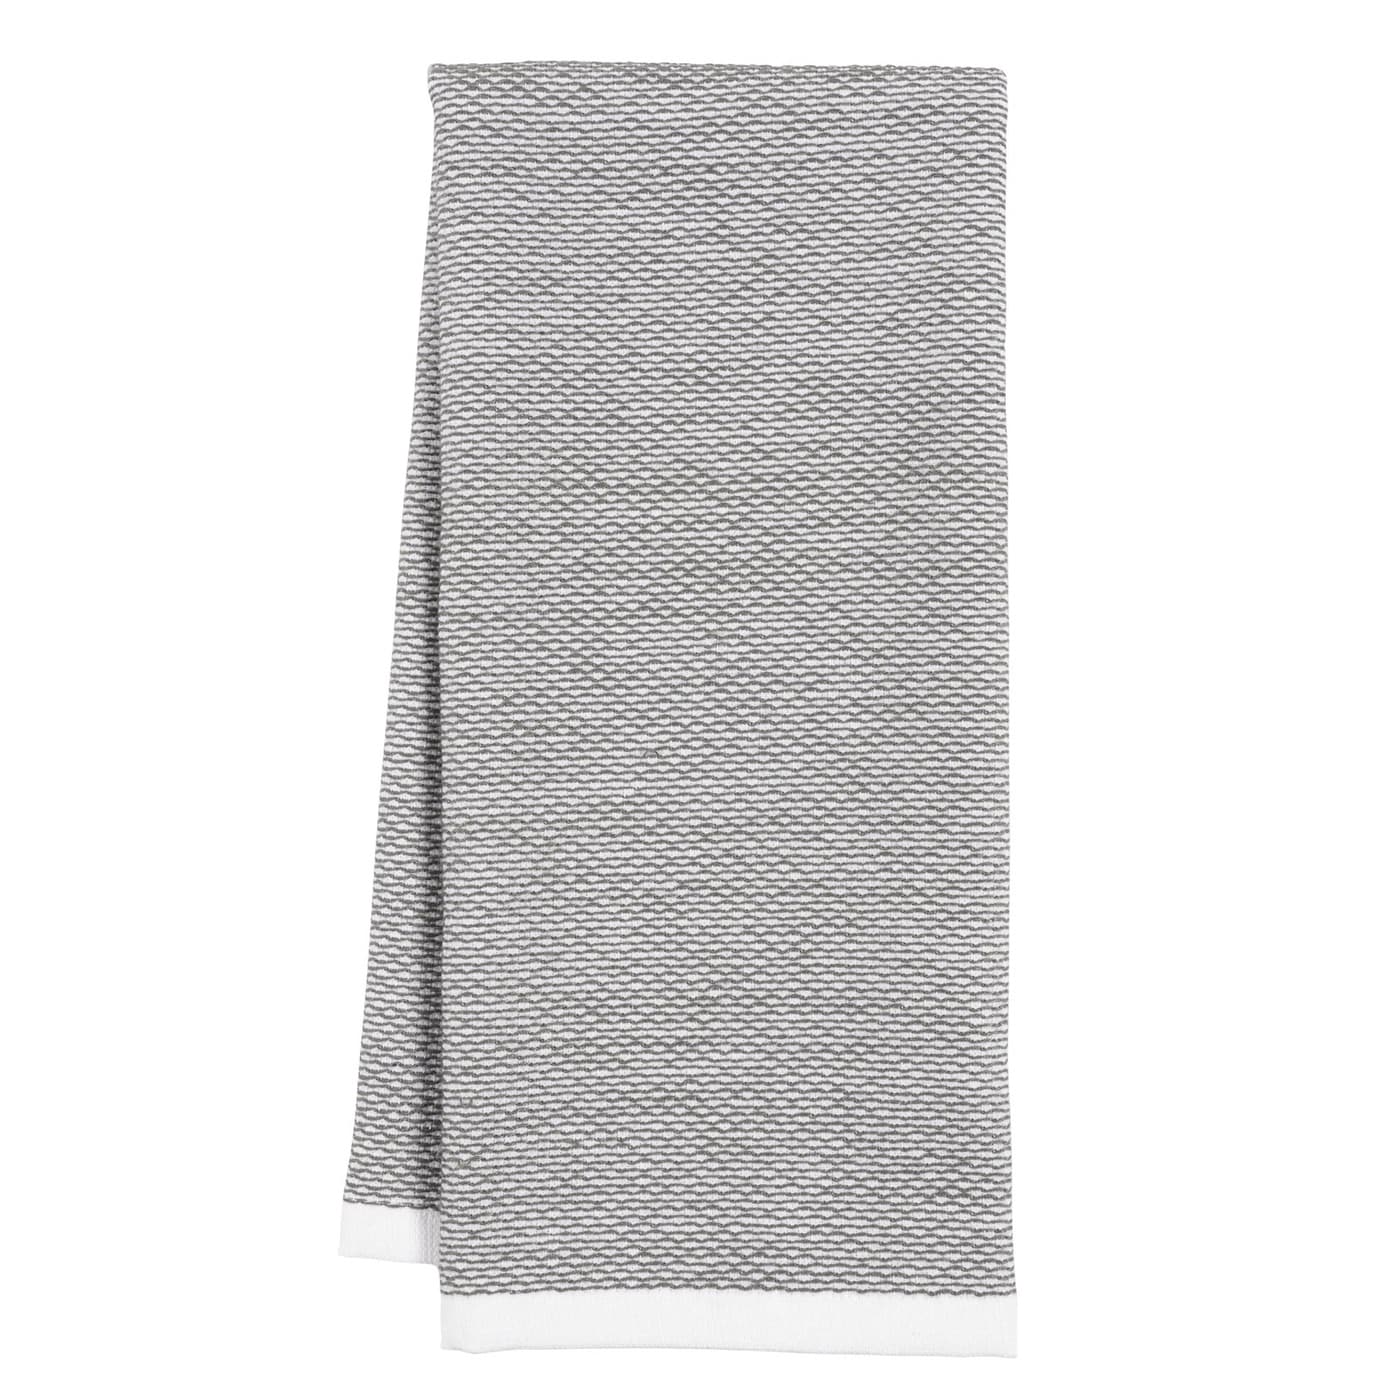 https://ak1.ostkcdn.com/images/products/is/images/direct/4bbb82cccb4e4cd3590984681dd31aff62ce36bf/KAF-Home-Ayesha-Curry-Mixed-Utility-Kitchen-Towels%2C-Set-of-6.jpg